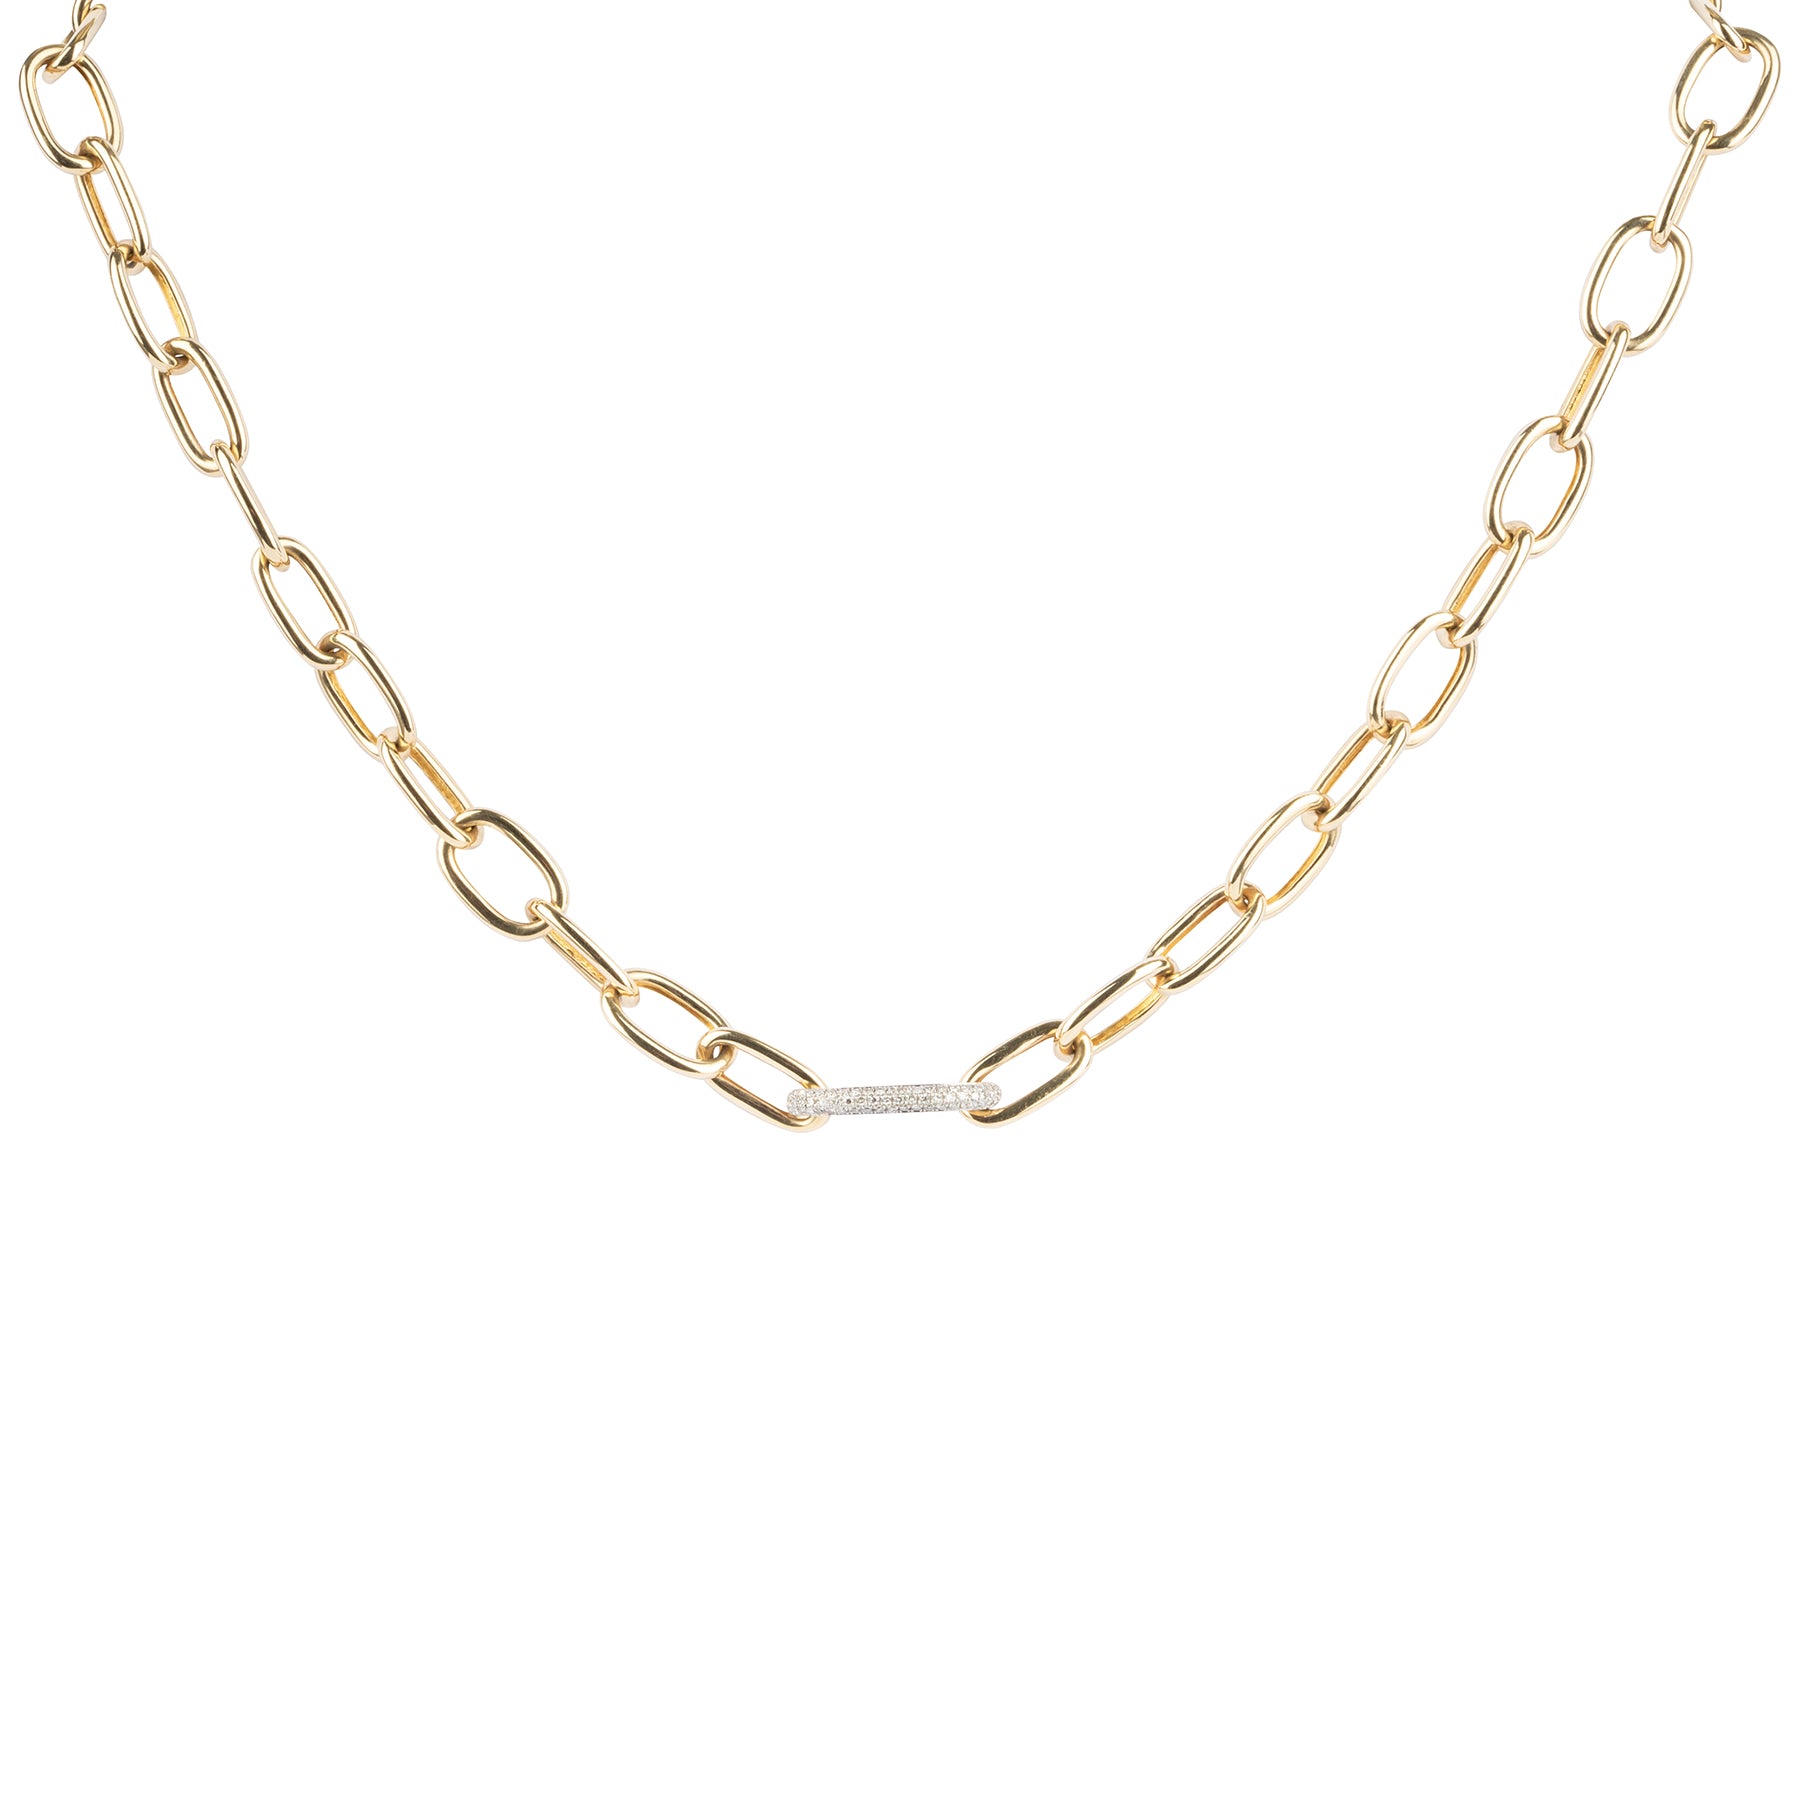 Thick Oval Single Pave Diamond Chain Link Necklace - Nina Segal Jewelry